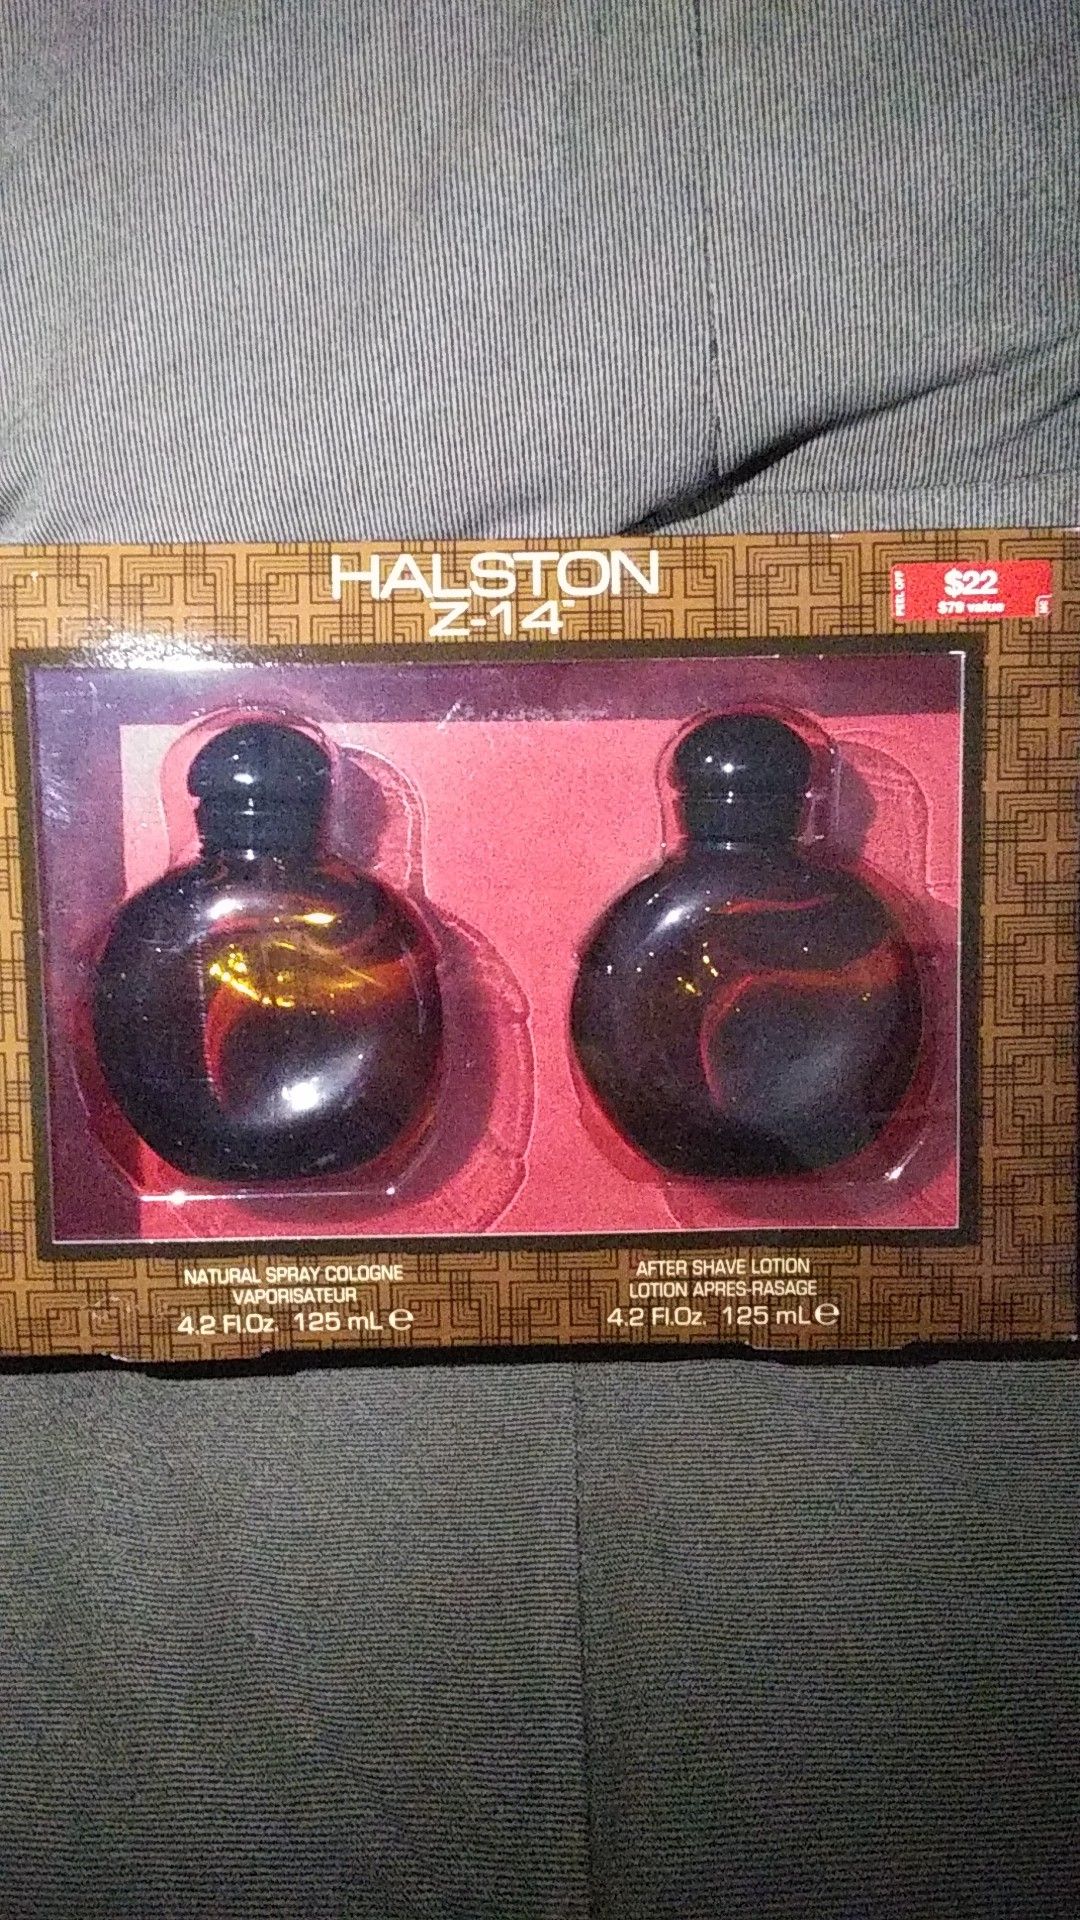 Halston Colonge and After shave